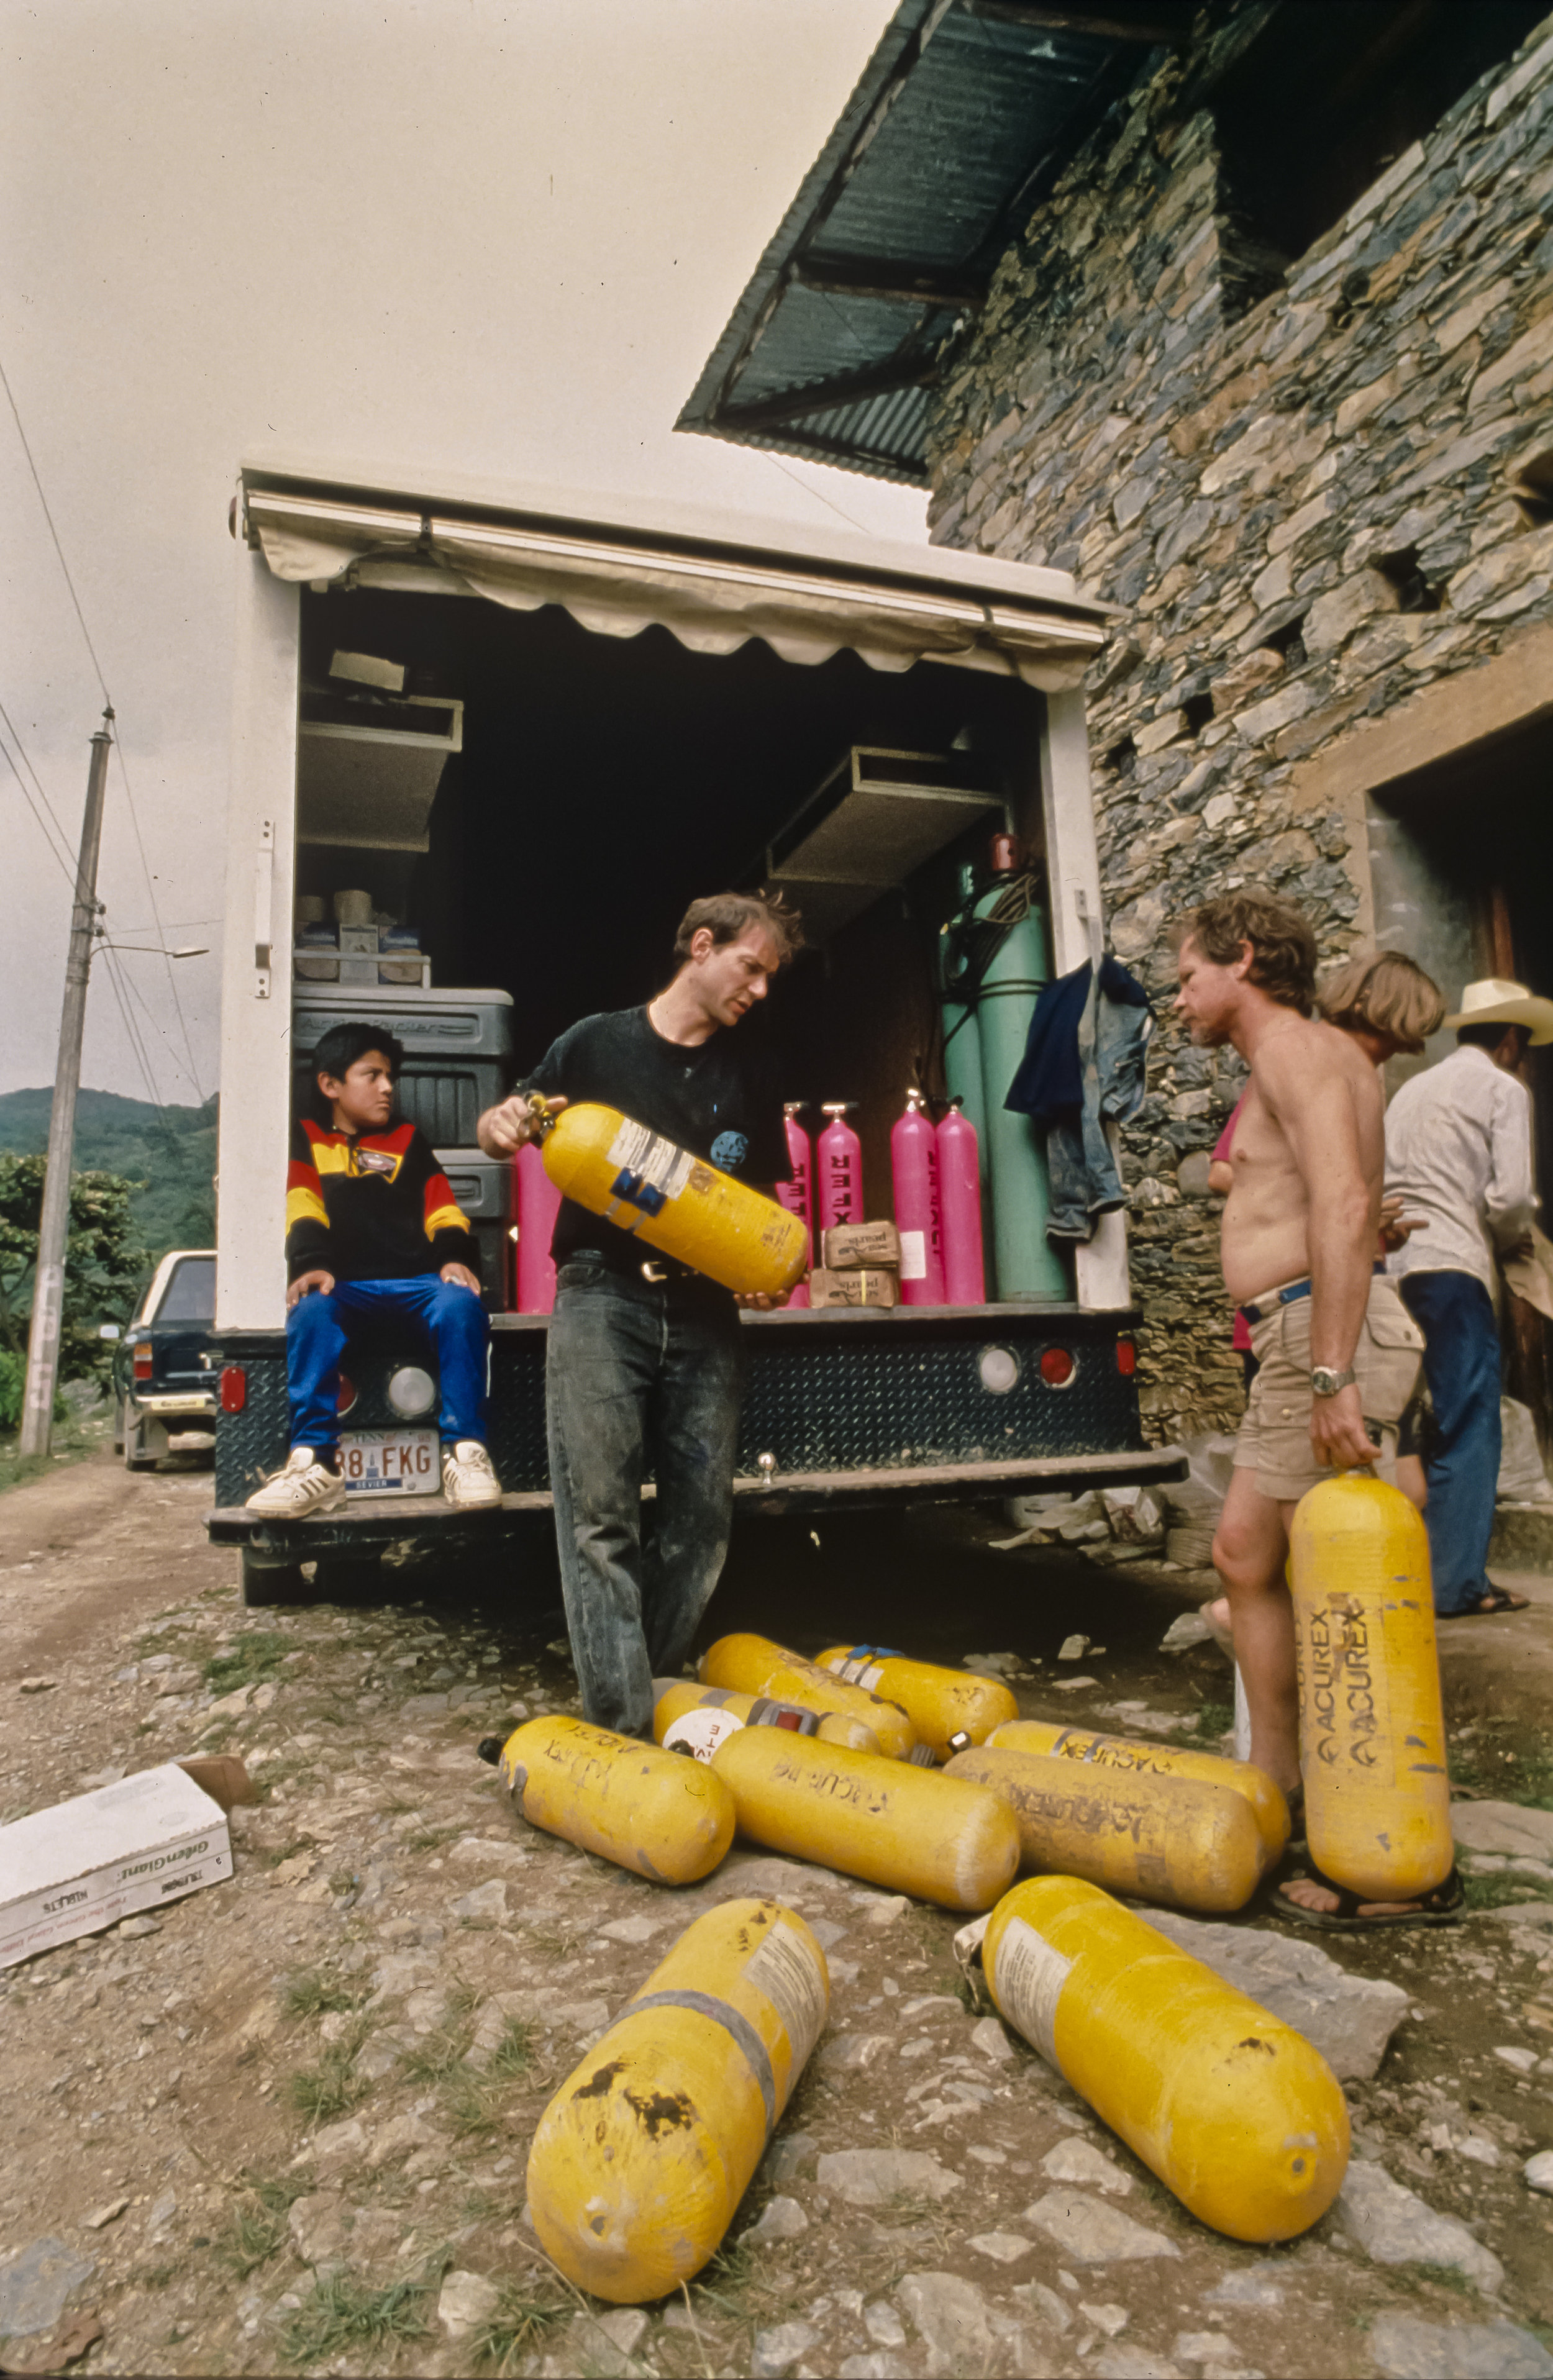  Arrival: Noel Sloan and Don Broussard unload dive cylinders at the house of Epifanio Villega. Photo by U. S. Deep Caving Team/Bill Stone. 